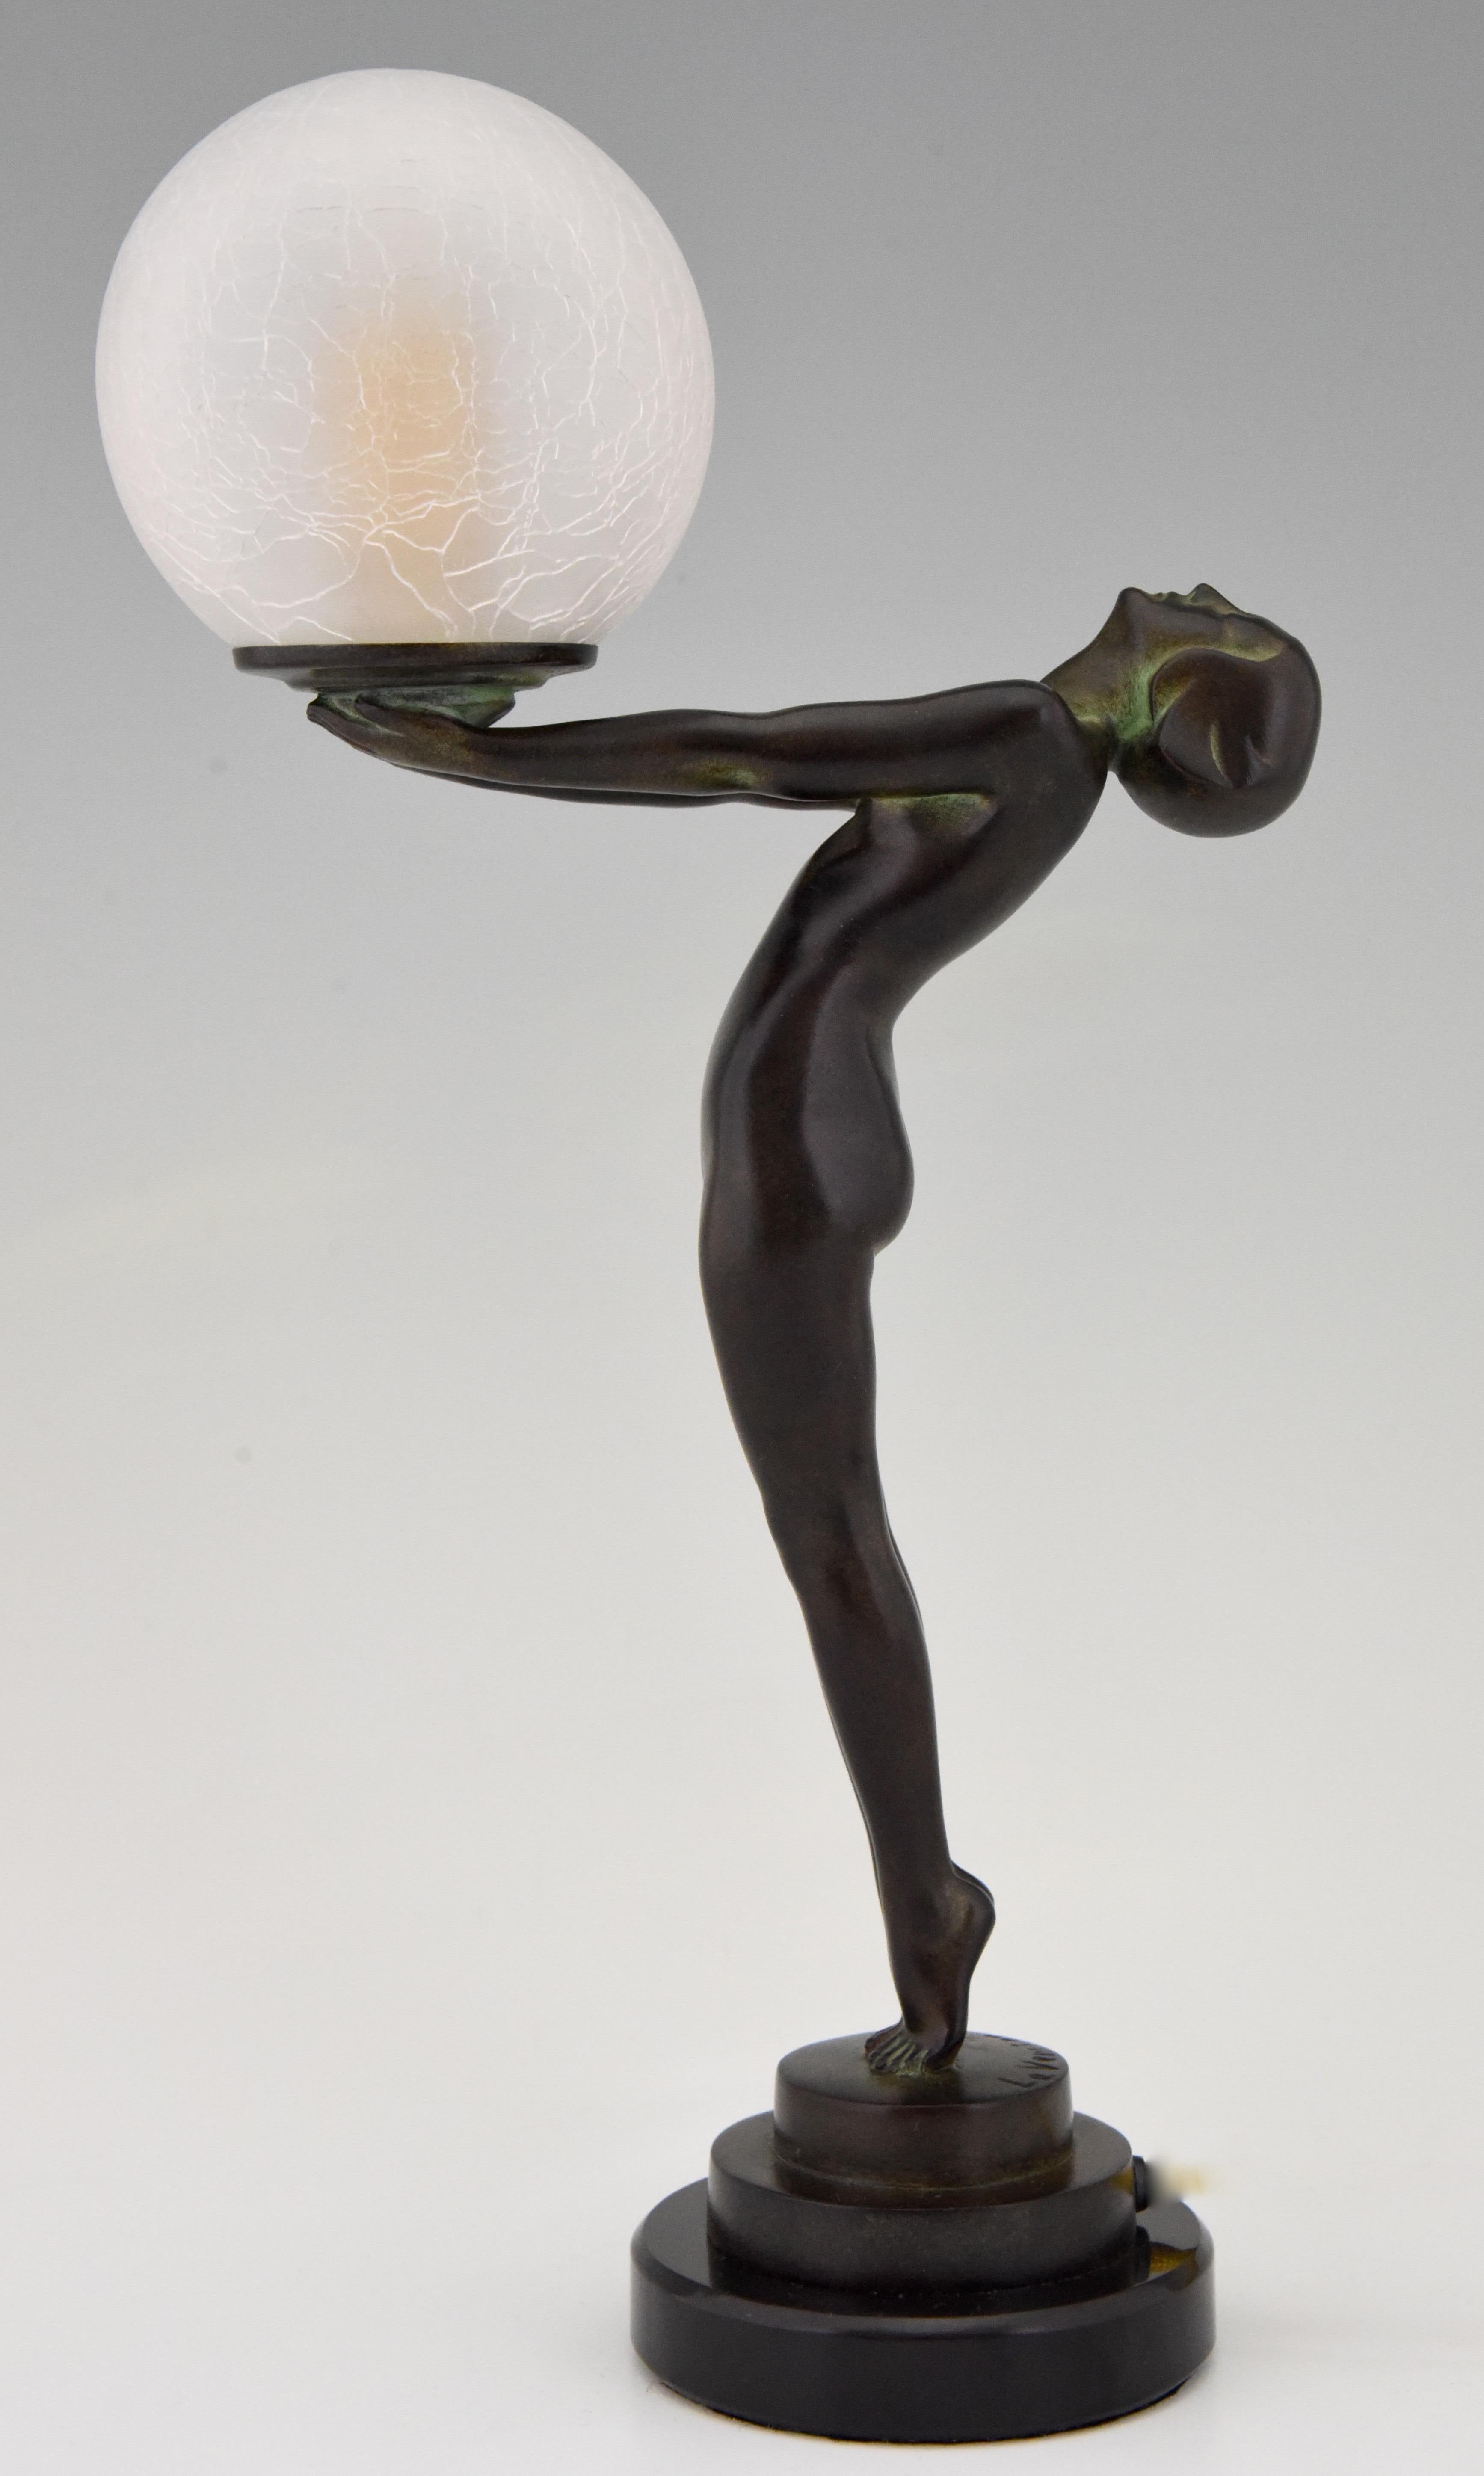 Art Deco style figural table lamp of a standing nude lady holding a glass globe.
This model is called Lueur lumineuse and is the smaller version of the iconic Clarté lamp by Max Le Verrier. 
The lamp is signed and has the Le Verrier foundry mark.